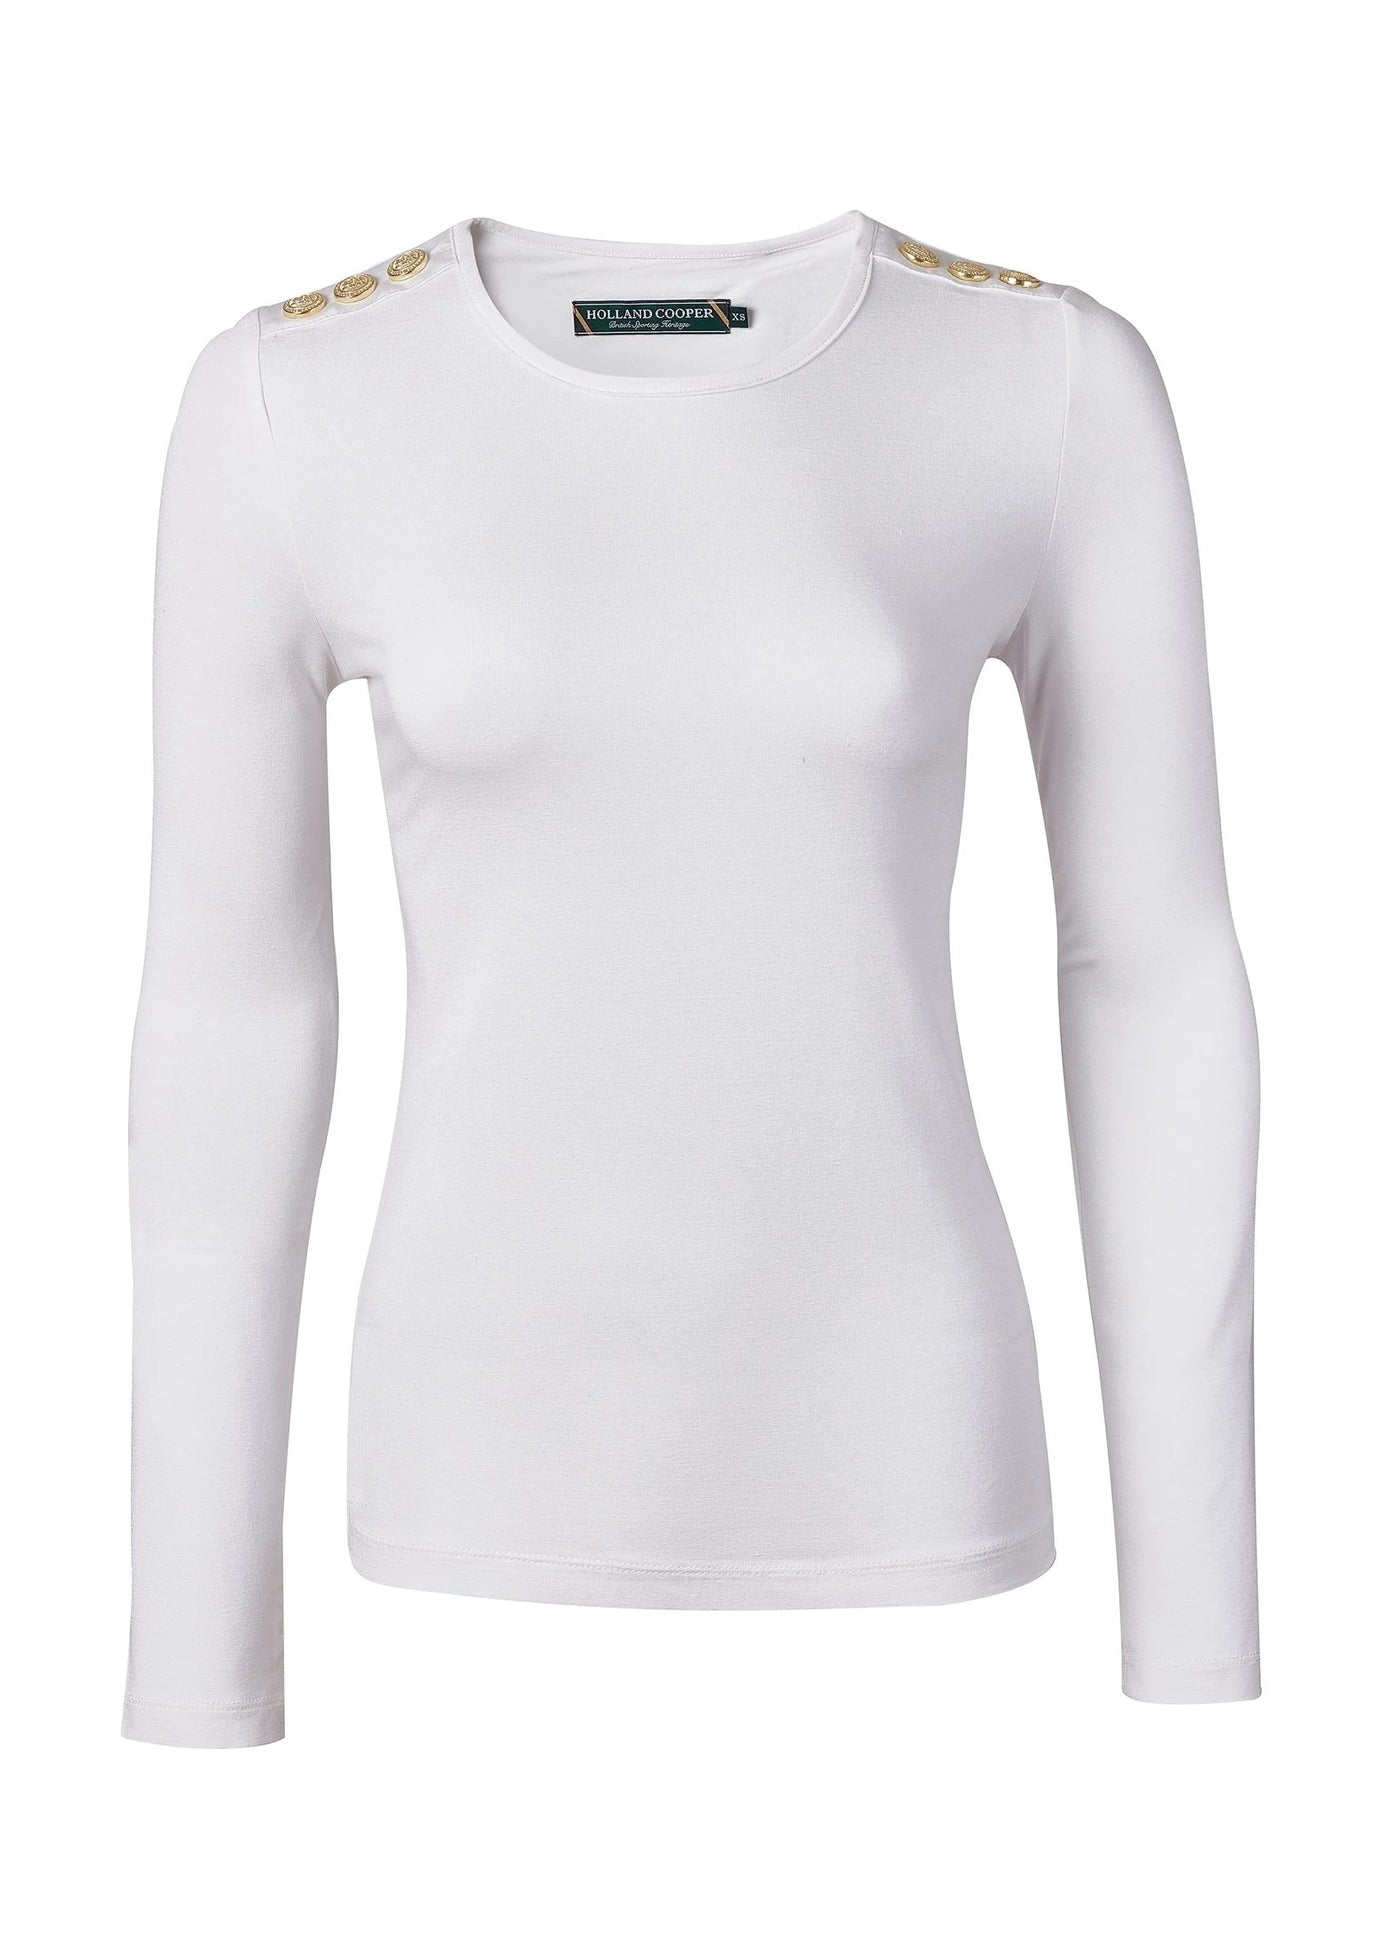 Holland Cooper Long Sleeve Crew Neck Tee in White Front